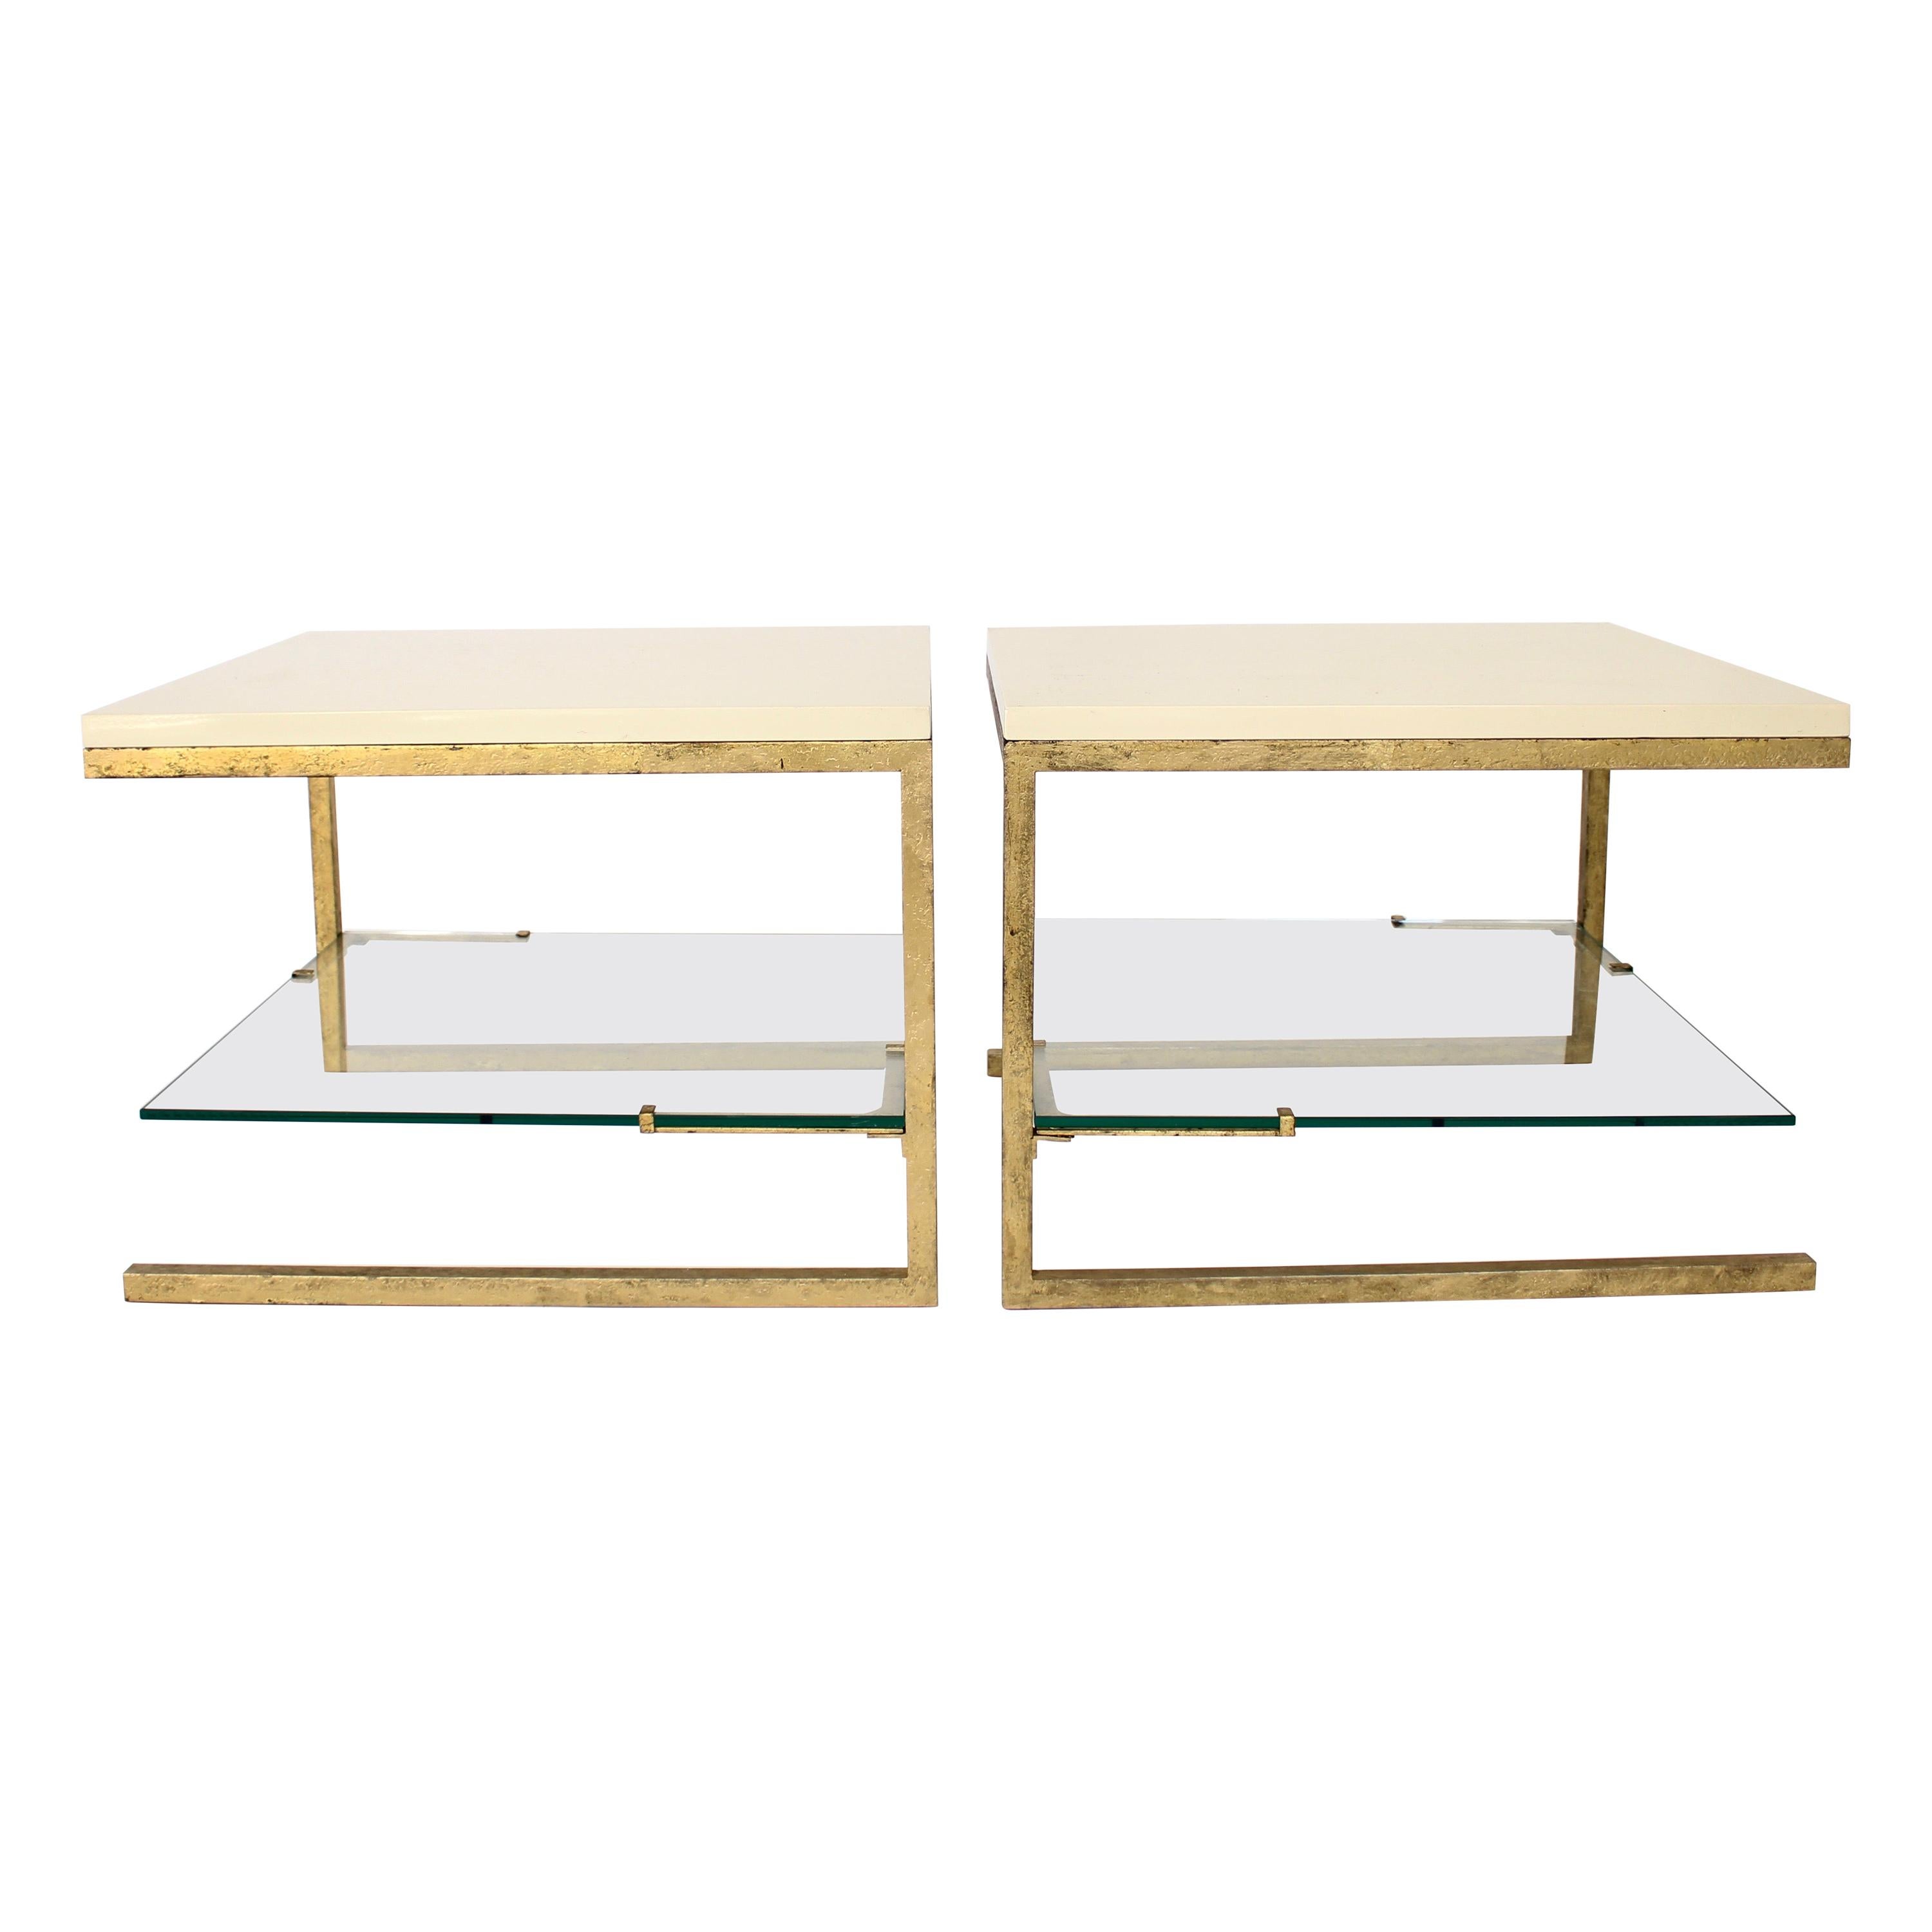  Maison Ramsay Side Tables Pair of Cream Lacquered Top Gilded Iron Frame Work